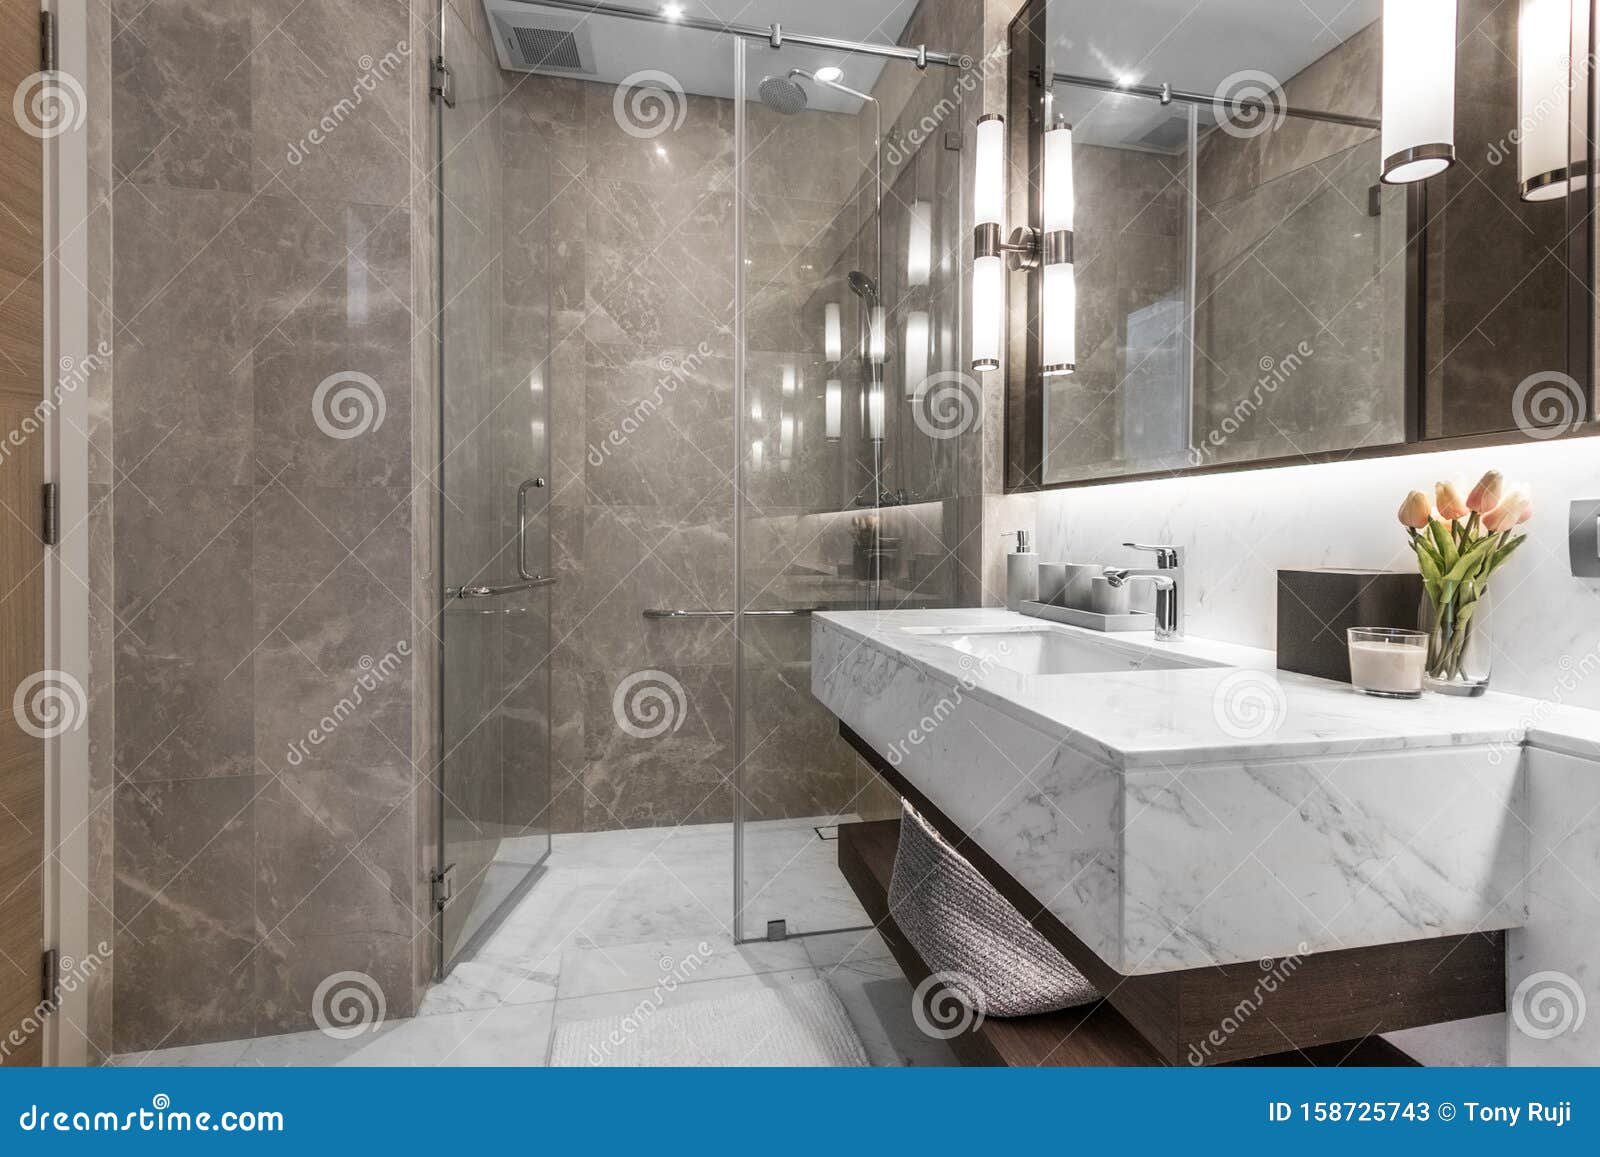 Clean and White Bathroom with Amenities Stock Image - Image of liquid ...